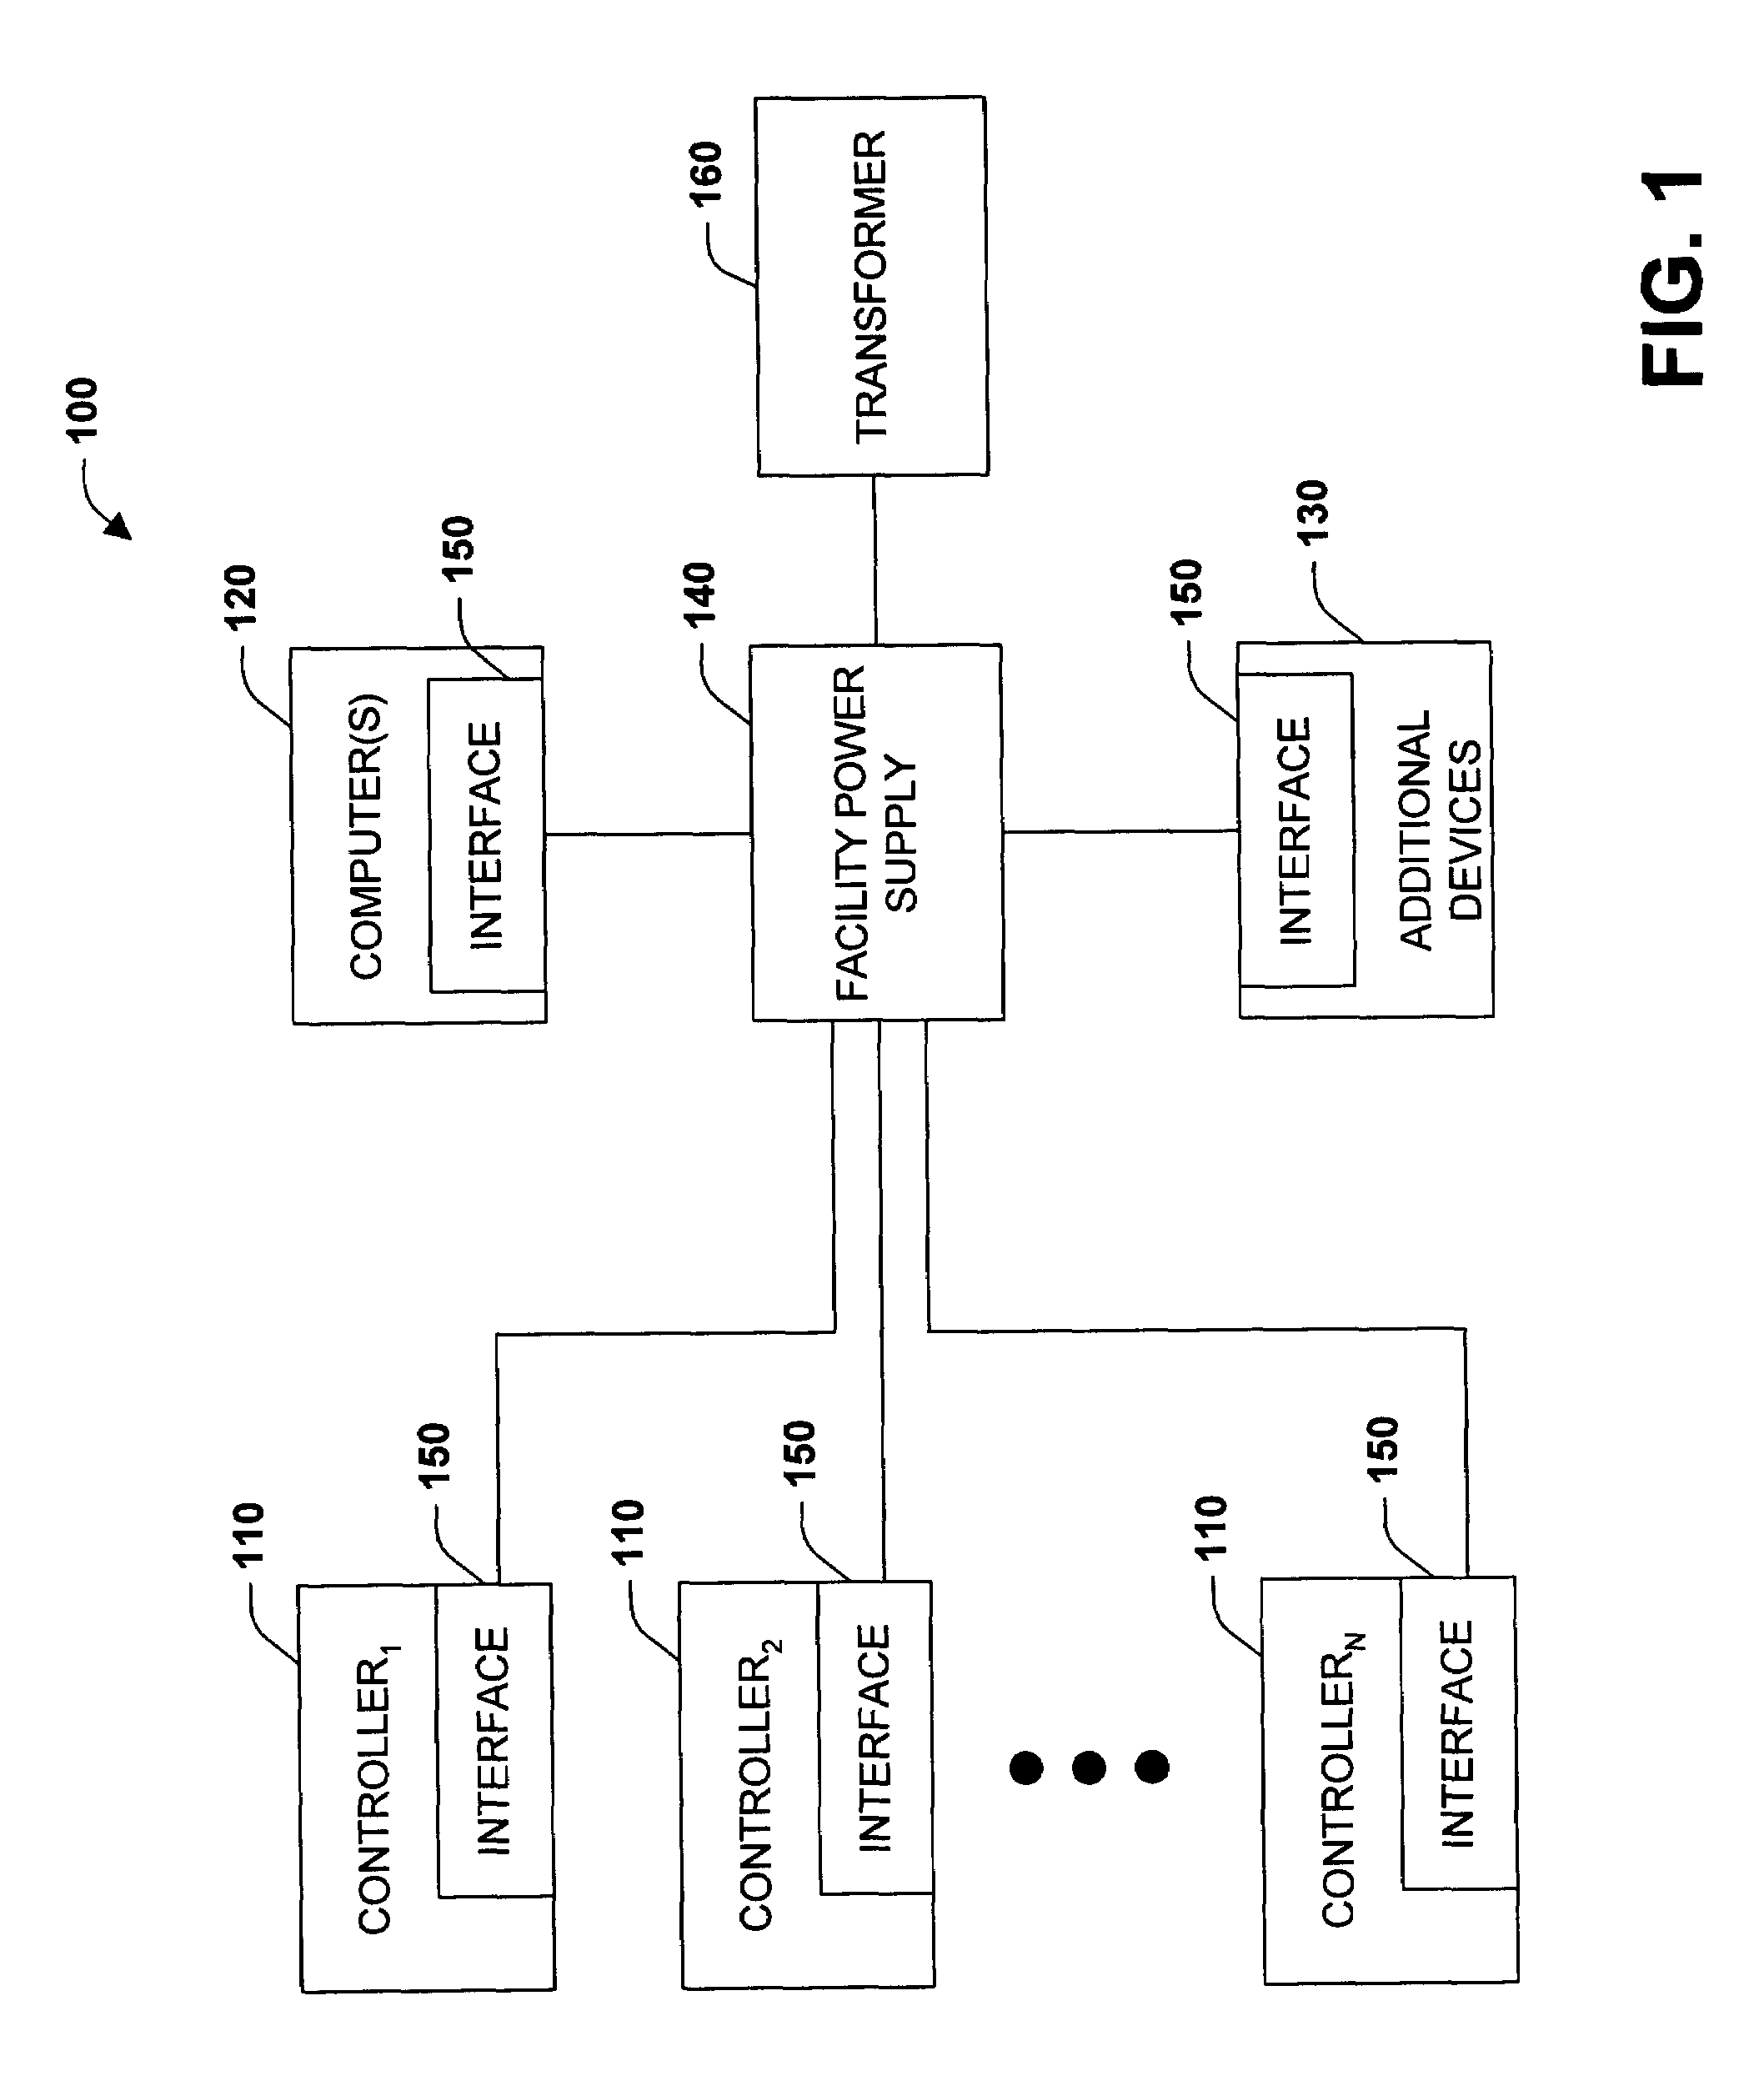 Power supply communication system and method